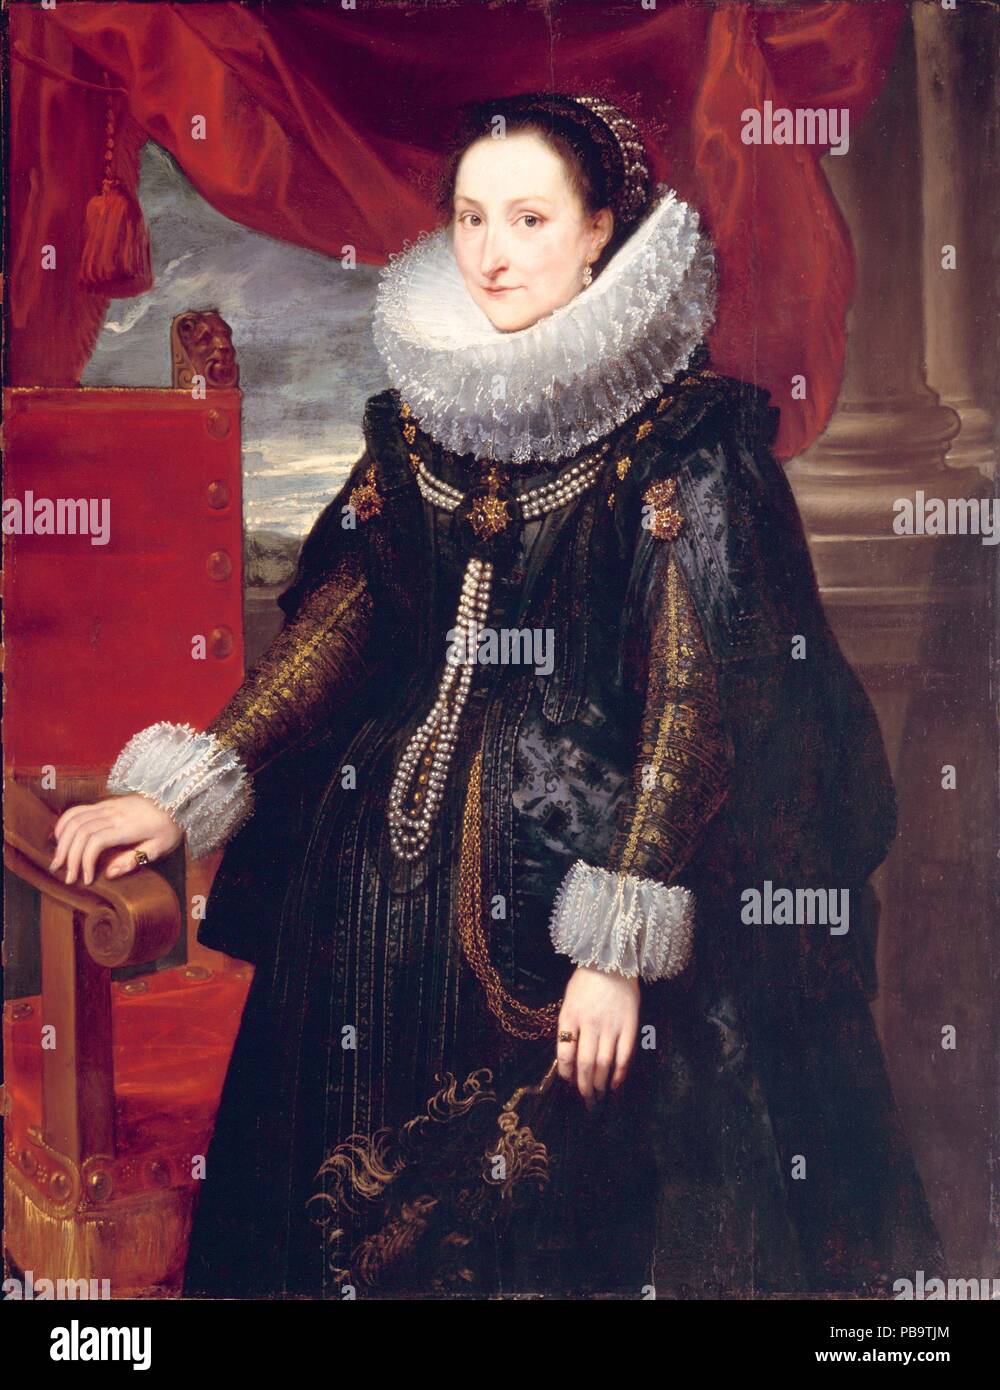 Portrait of a Woman. Artist: Cornelis de Vos (Flemish, Hulst 1584/85-1651 Antwerp). Dimensions: 49 3/8 x 38 in. (125.4 x 96.5 cm).  Although the present painting entered the Museum as a work of Van Dyck, the reserved expression of the sitter and the meticulous handling of the details of the costume are characteristic of de Vos's work. This highly respected Antwerp portrait painter is known for his dignified portraits which nevertheless maintain a charming modesty. He particularly excelled in group portraits of children. Museum: Metropolitan Museum of Art, New York, USA. Stock Photo